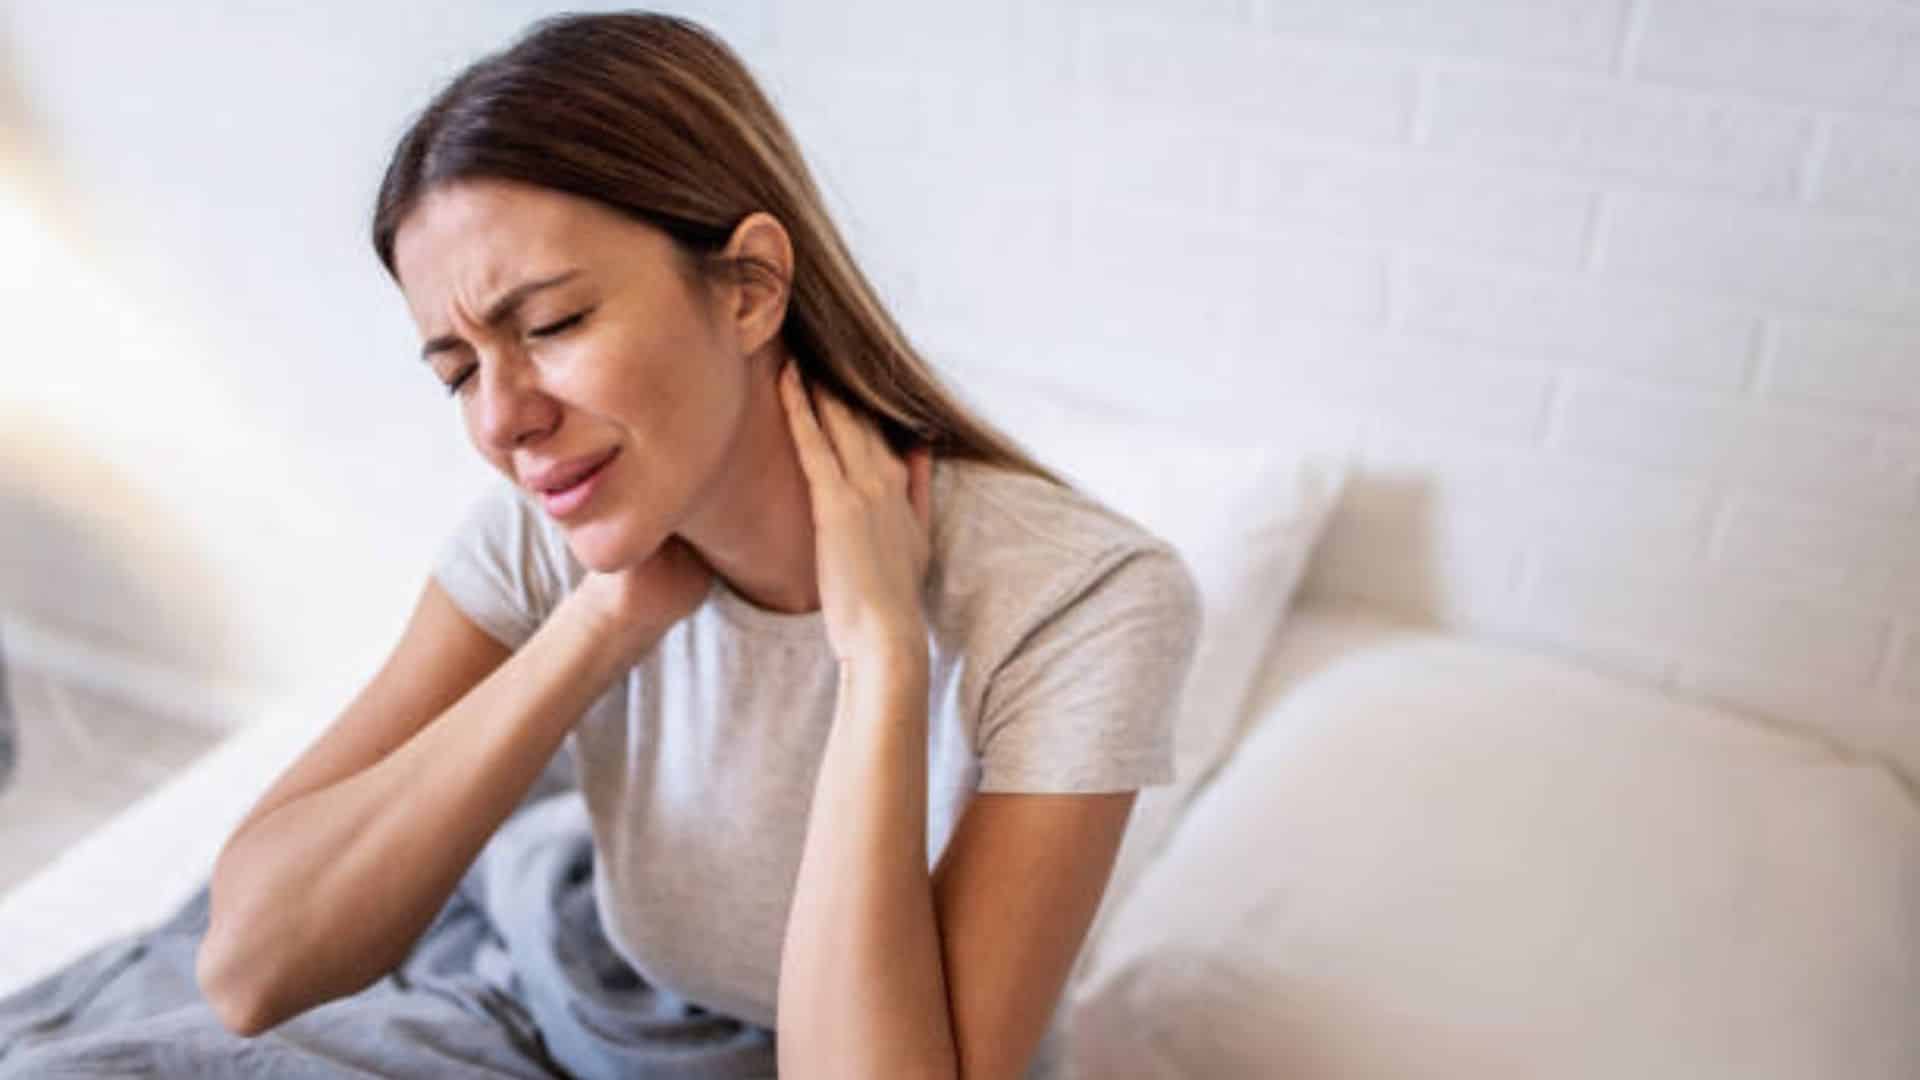 Why Do I Have Neck Pain from Sleeping?